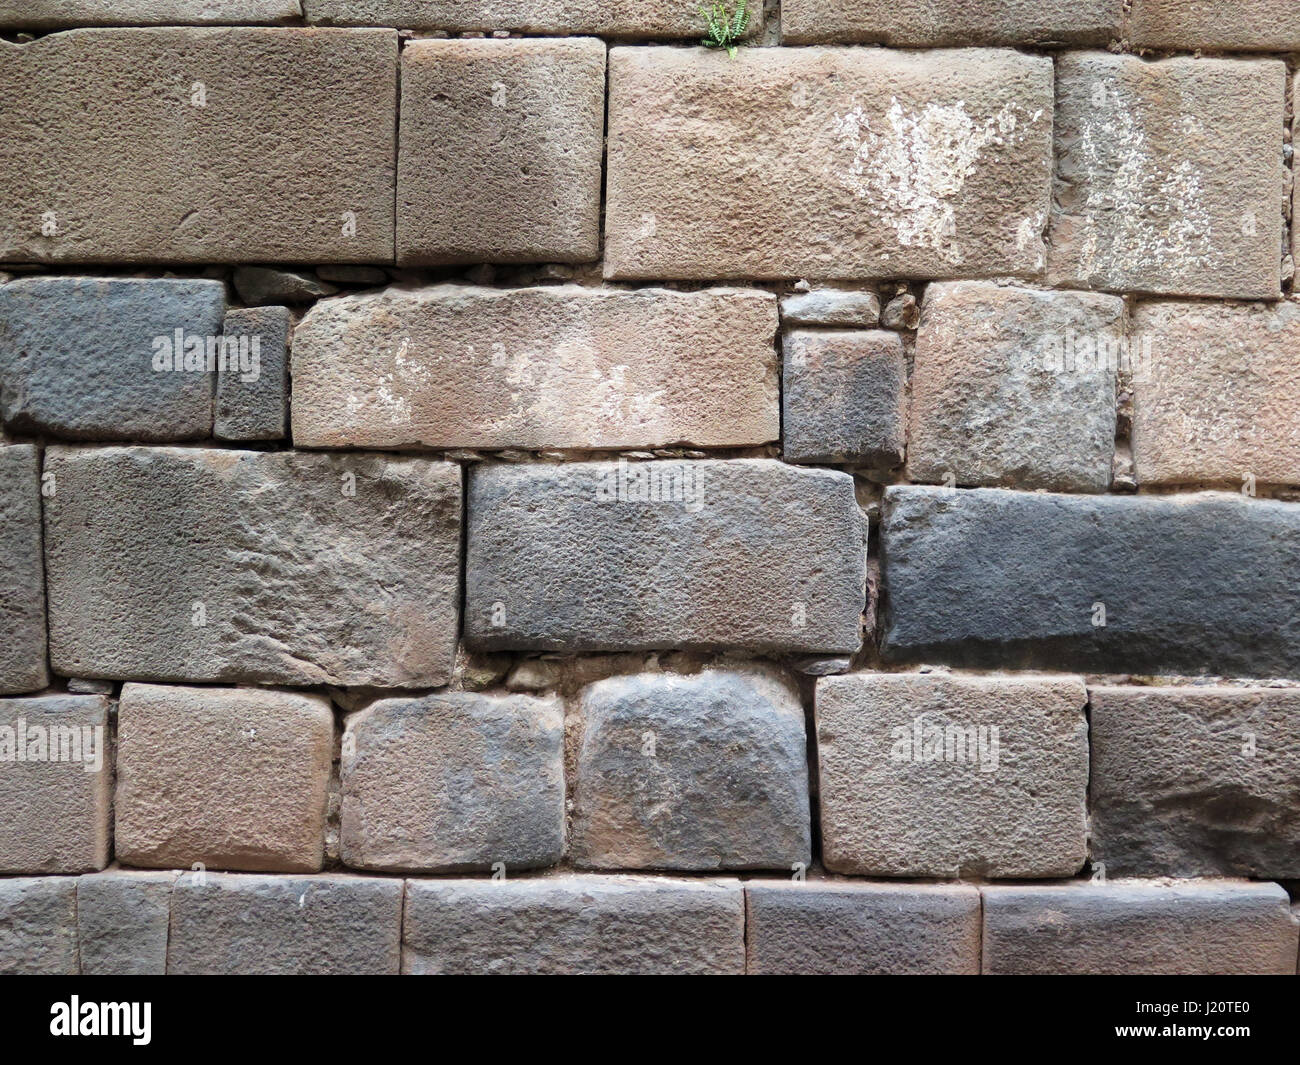 Inca wall made of natural volcanic stones, perfectly shaped, heritage of Inca history and architecture in Cusco, Peru. Stock Photo